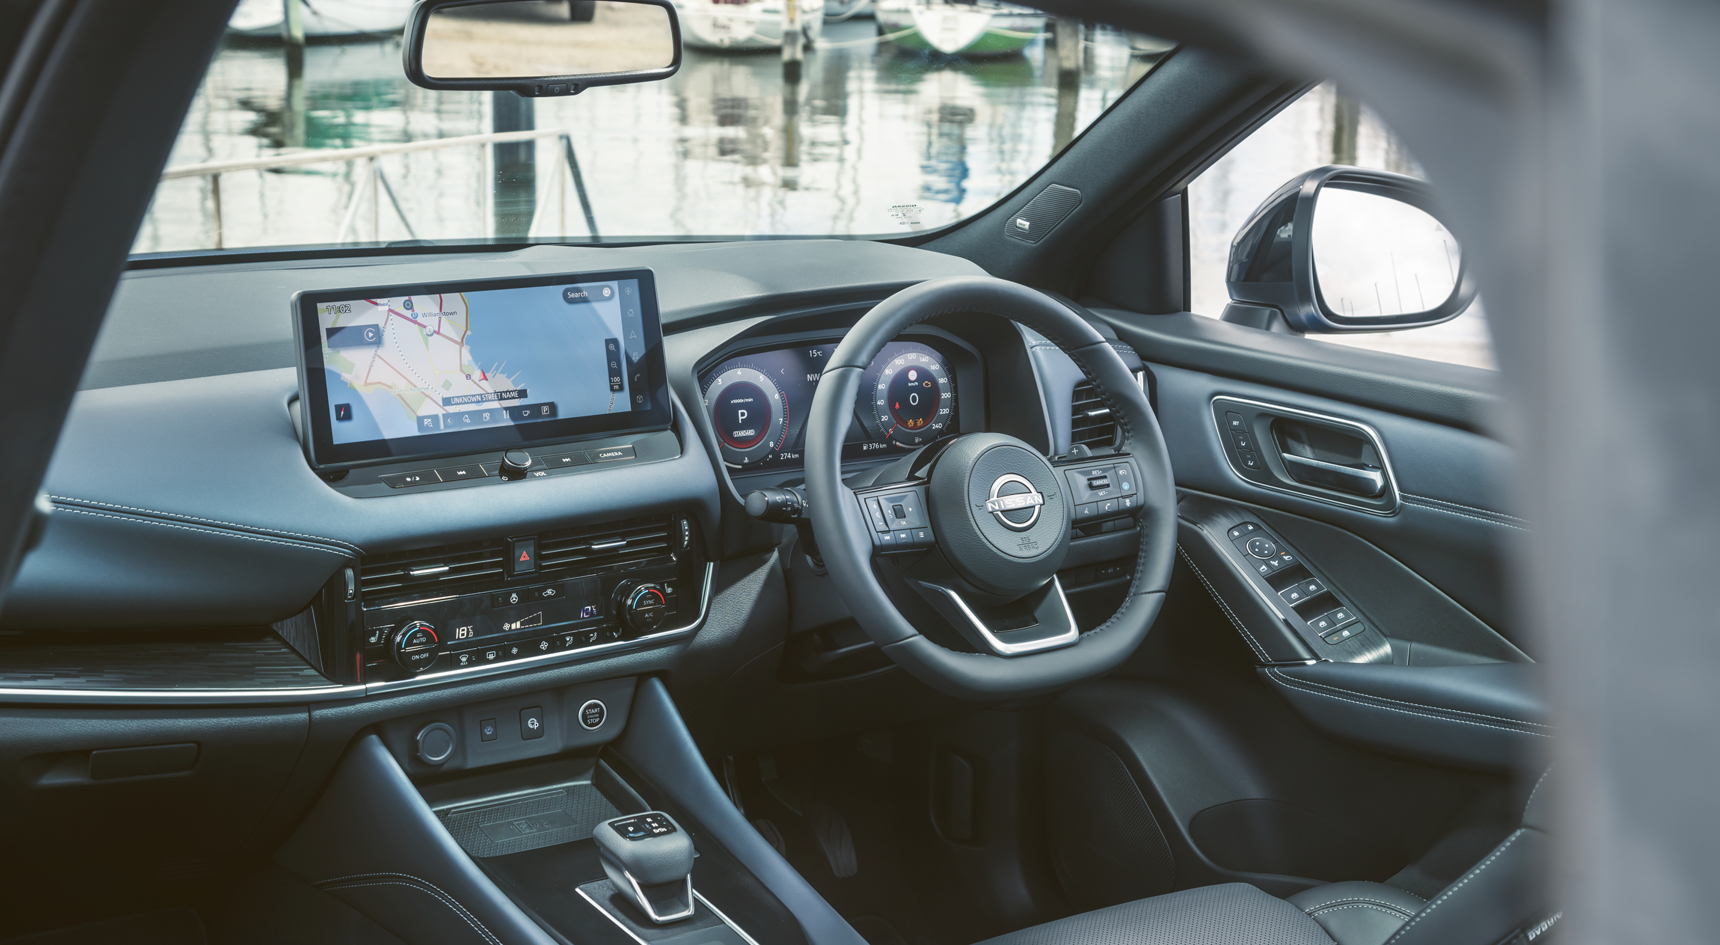 The interior of the Nissan Qashqai